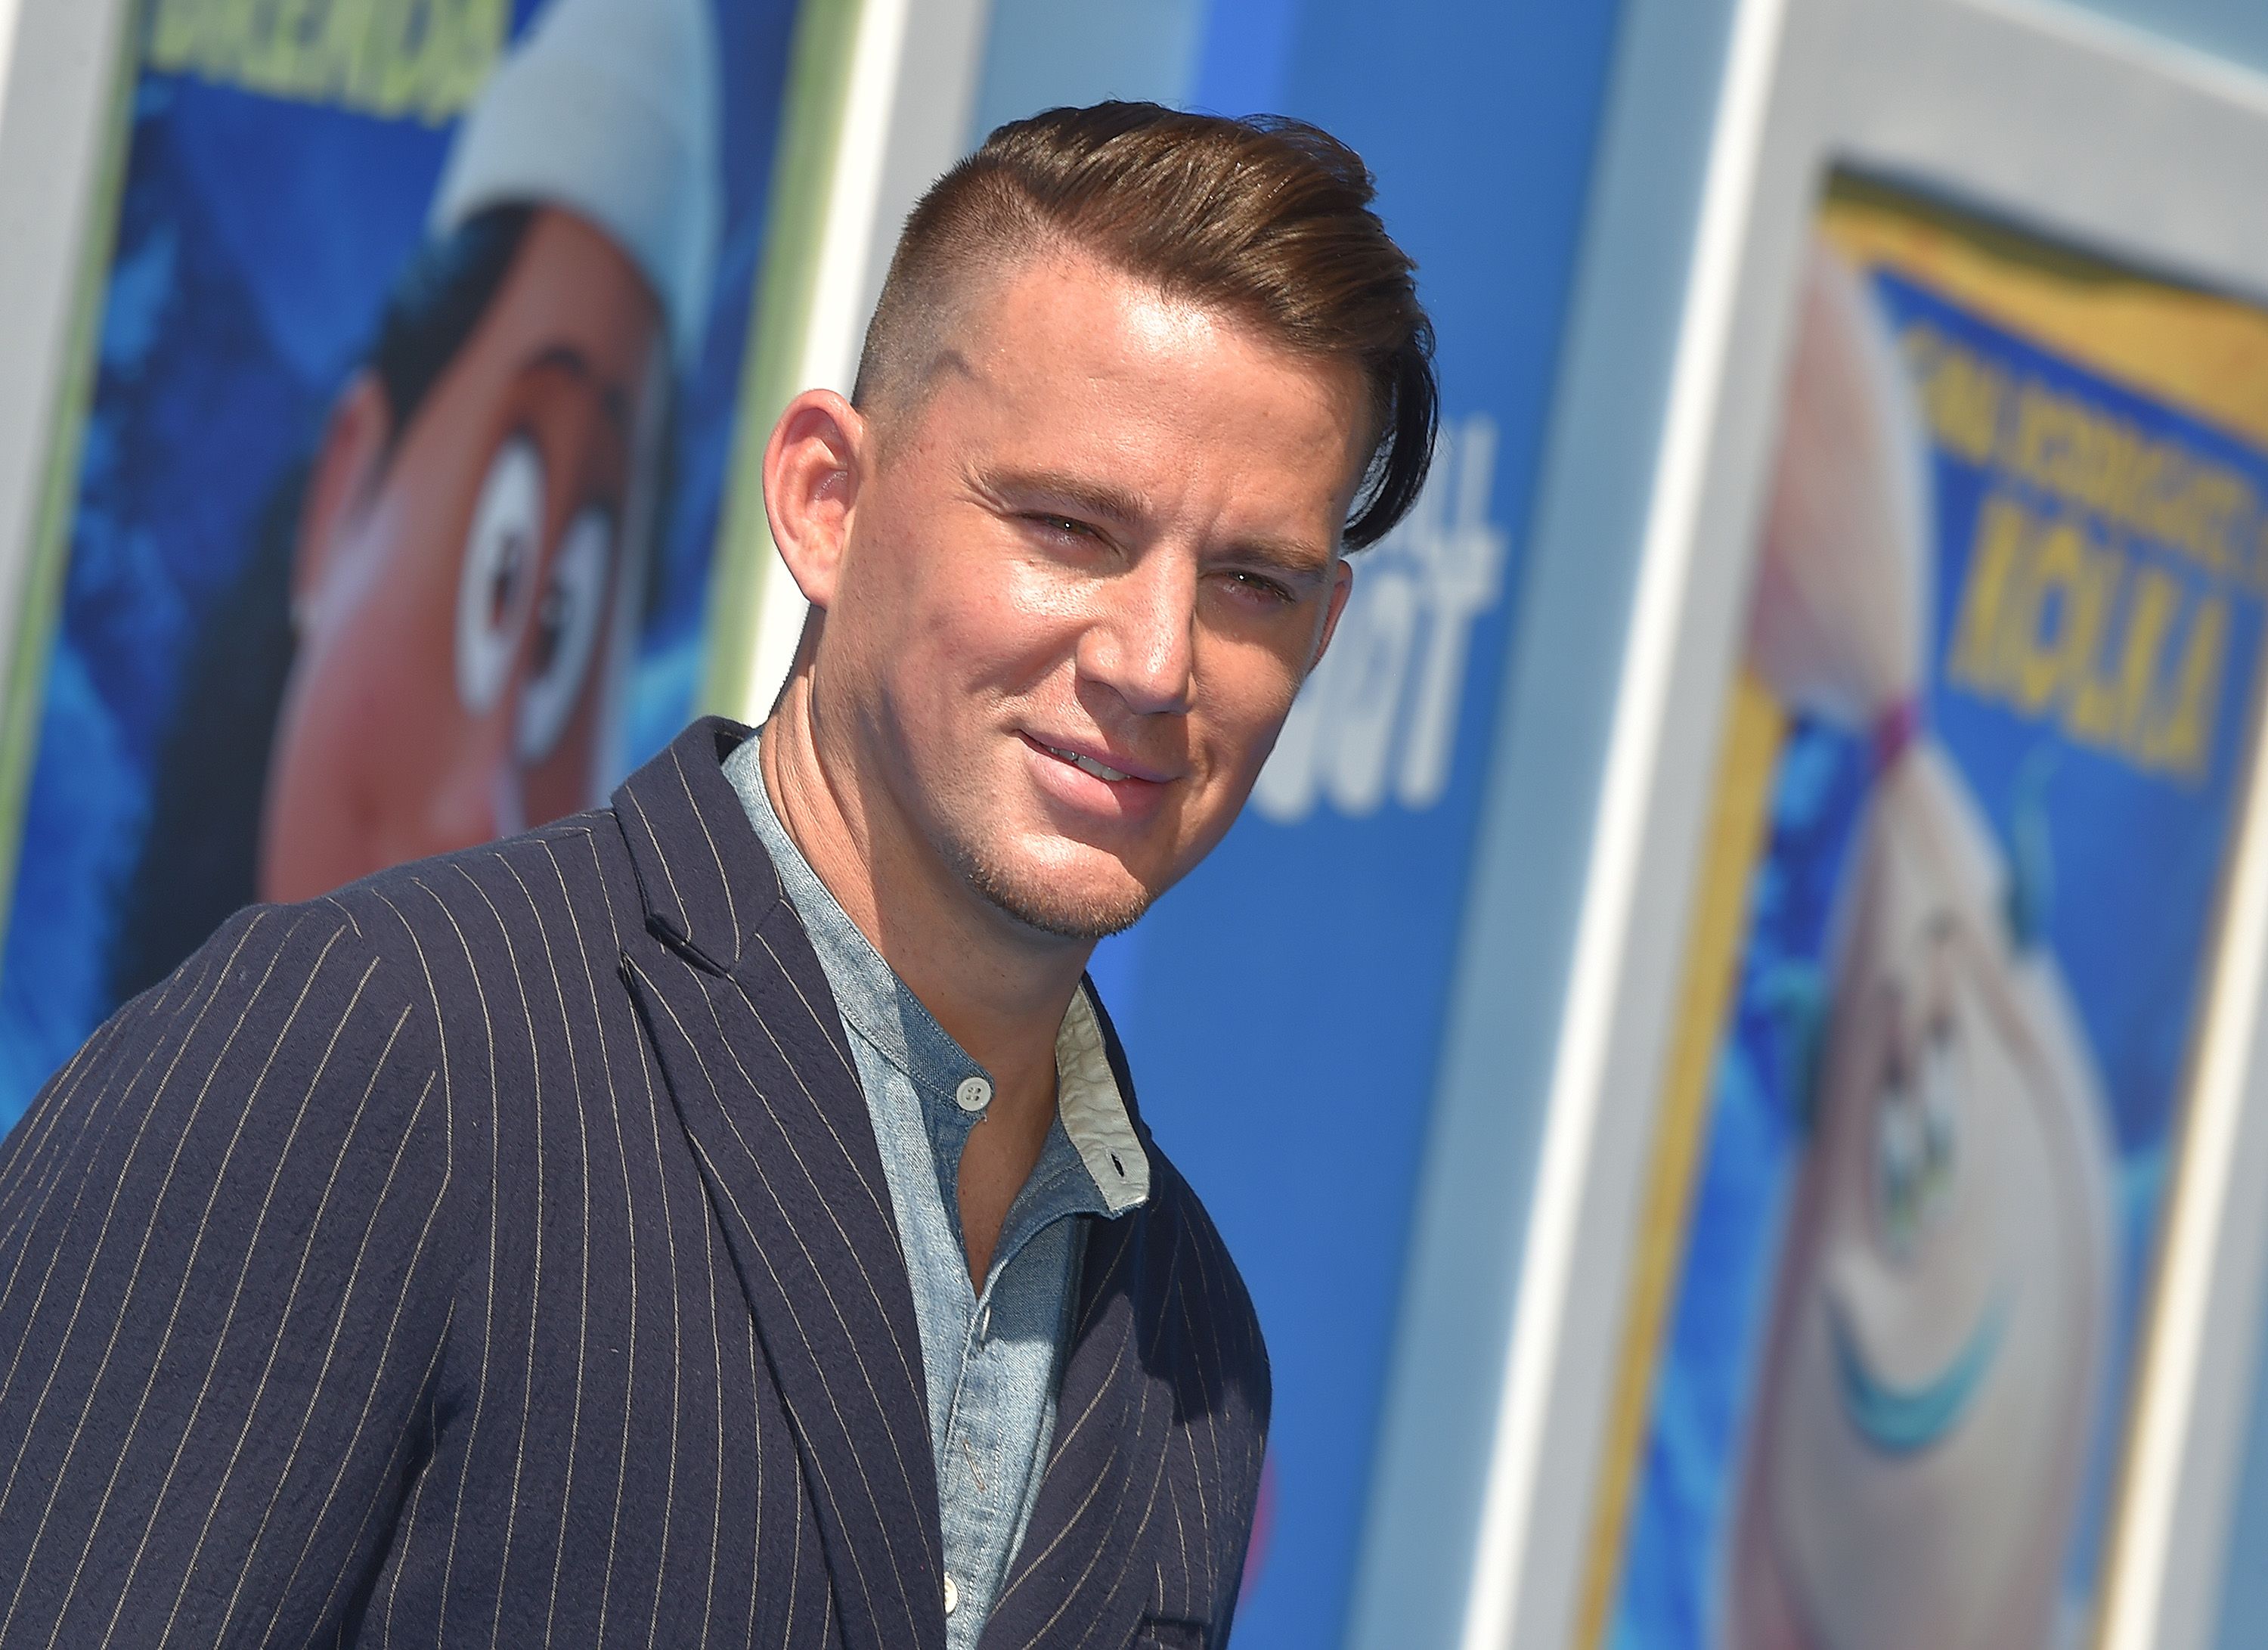 Channing Tatum Posts a Nearly Naked Pic of Himself to Instagram